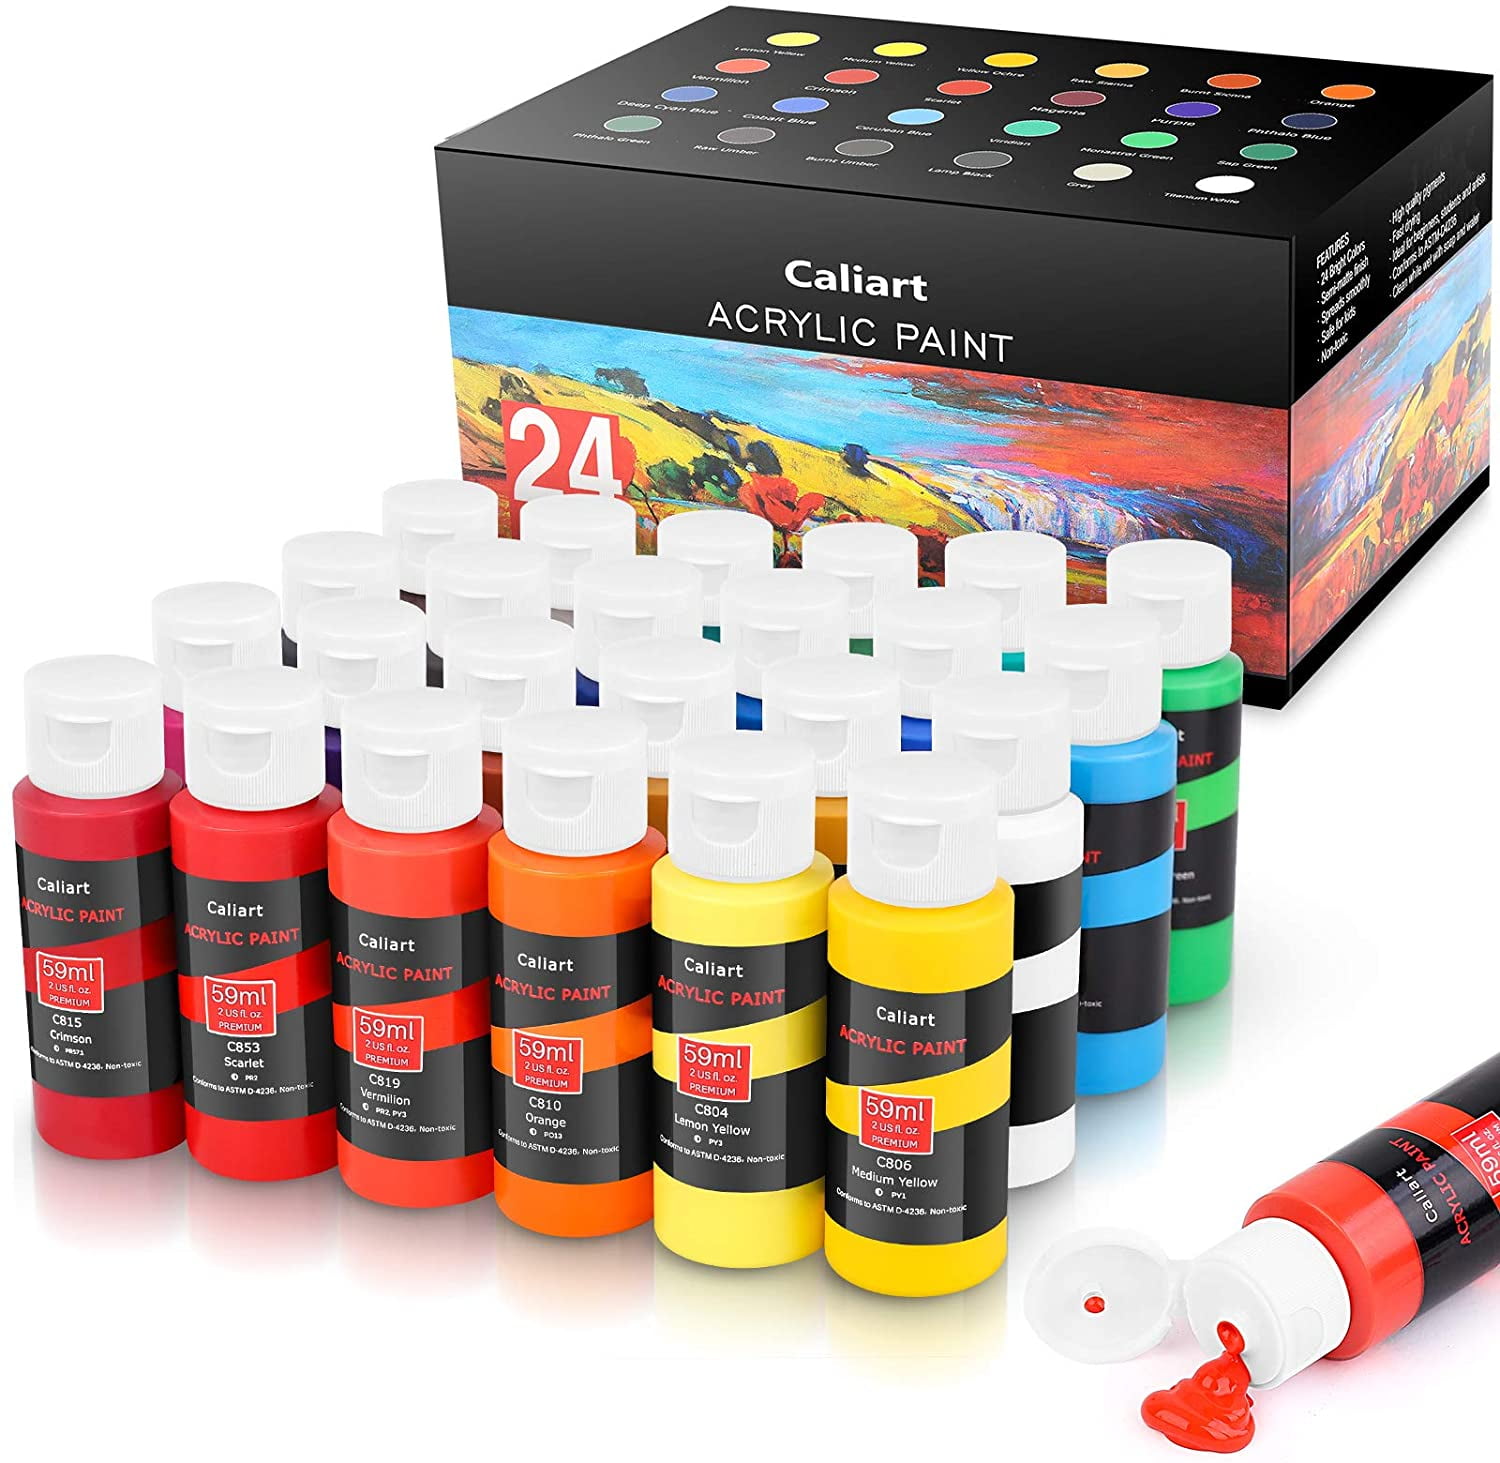 RoseArt Premium Paint Set – 24 Count Acrylic Paints for Canvas, Wood,  Ceramic and Fabrics – Craft Painting Supplies for Professional Artists